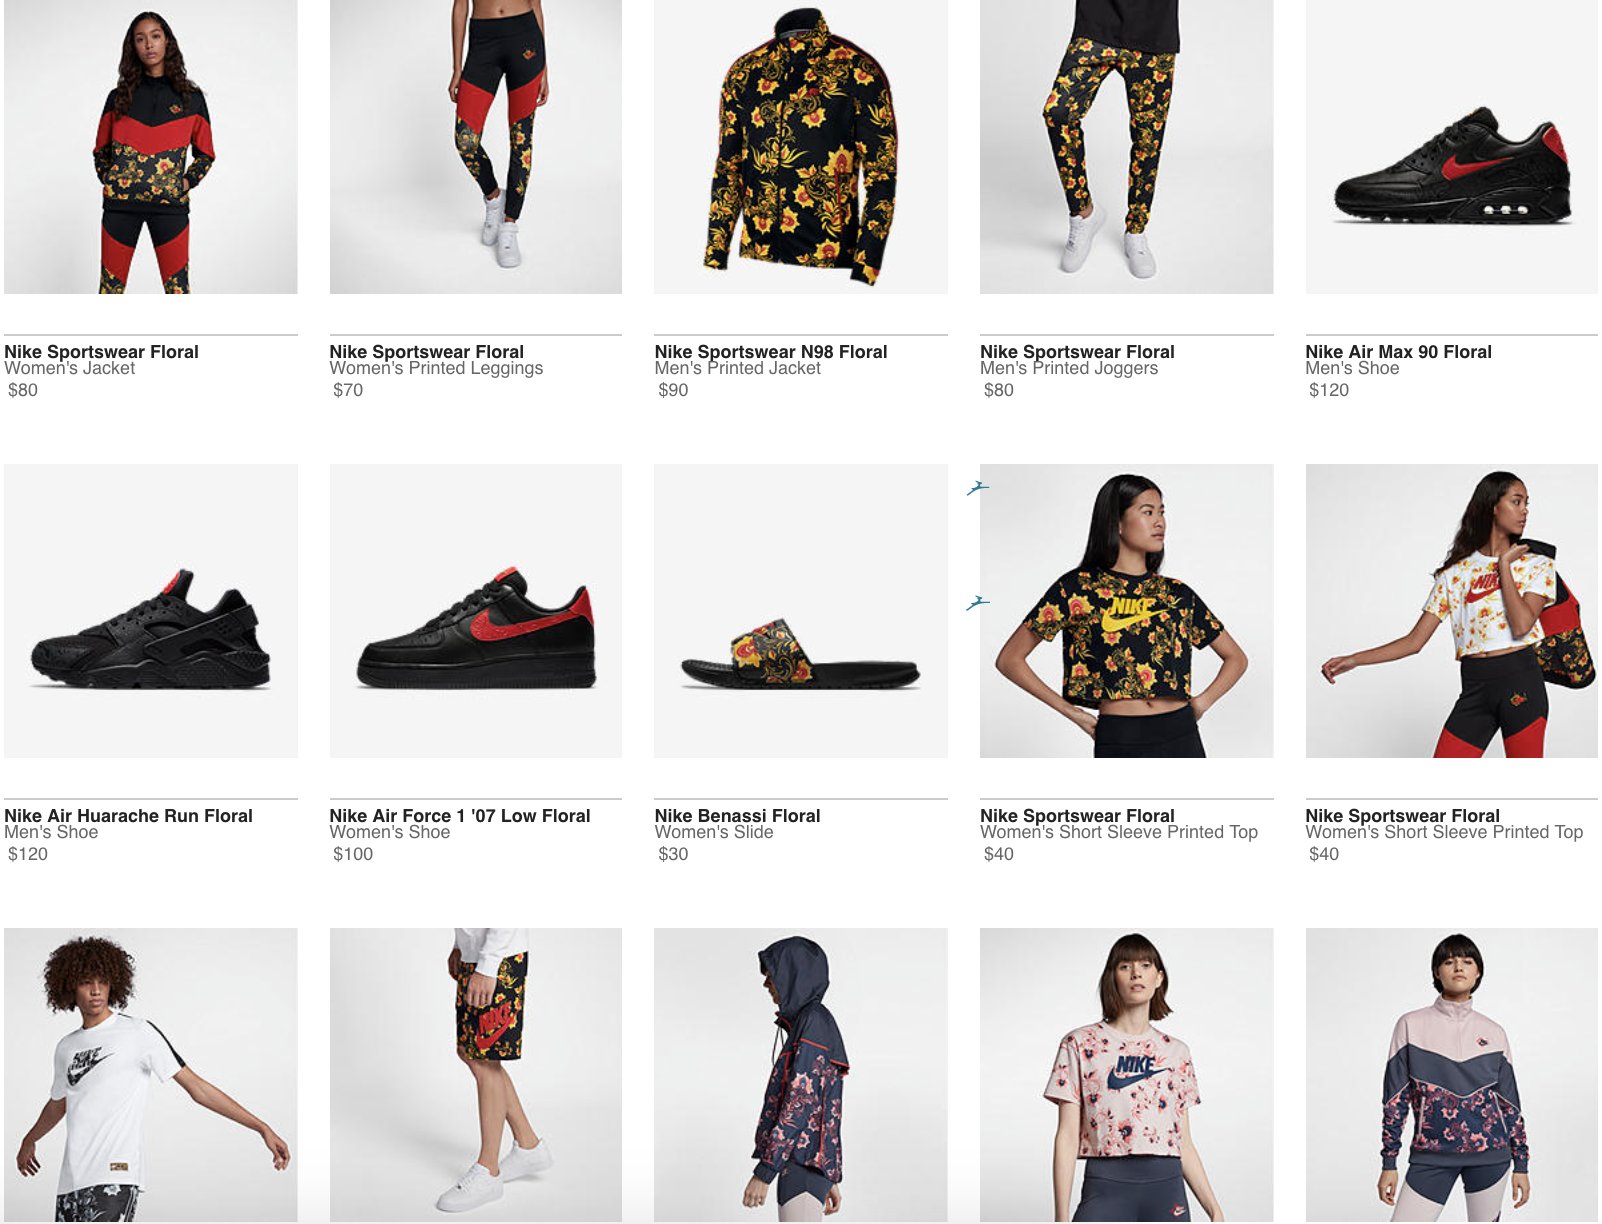 SOLELINKS al Twitter: "Nike Floral Collection is available via Nike US =&gt; https://t.co/VBzkqZvnsu / Twitter